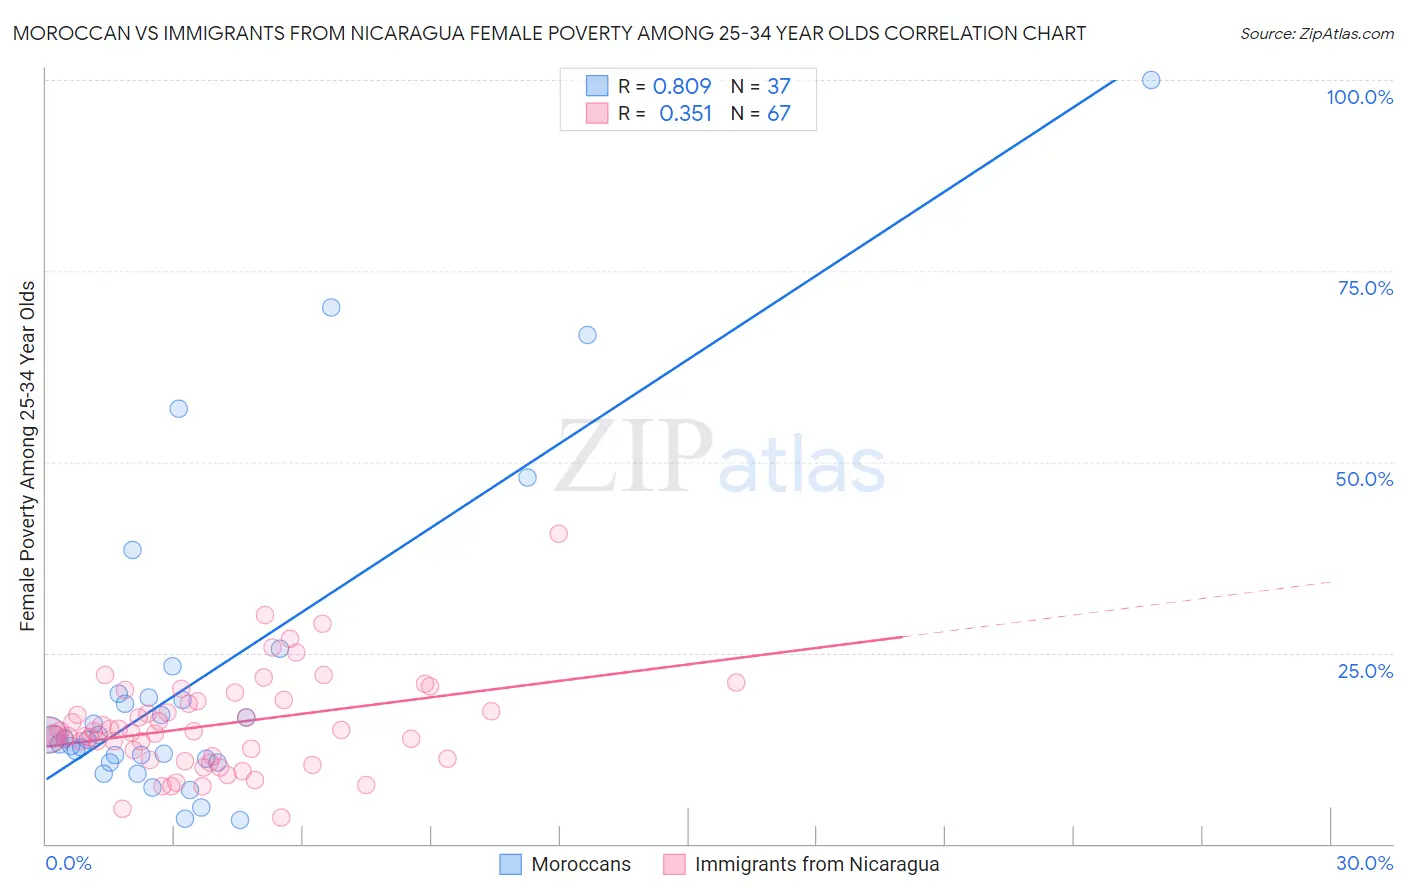 Moroccan vs Immigrants from Nicaragua Female Poverty Among 25-34 Year Olds